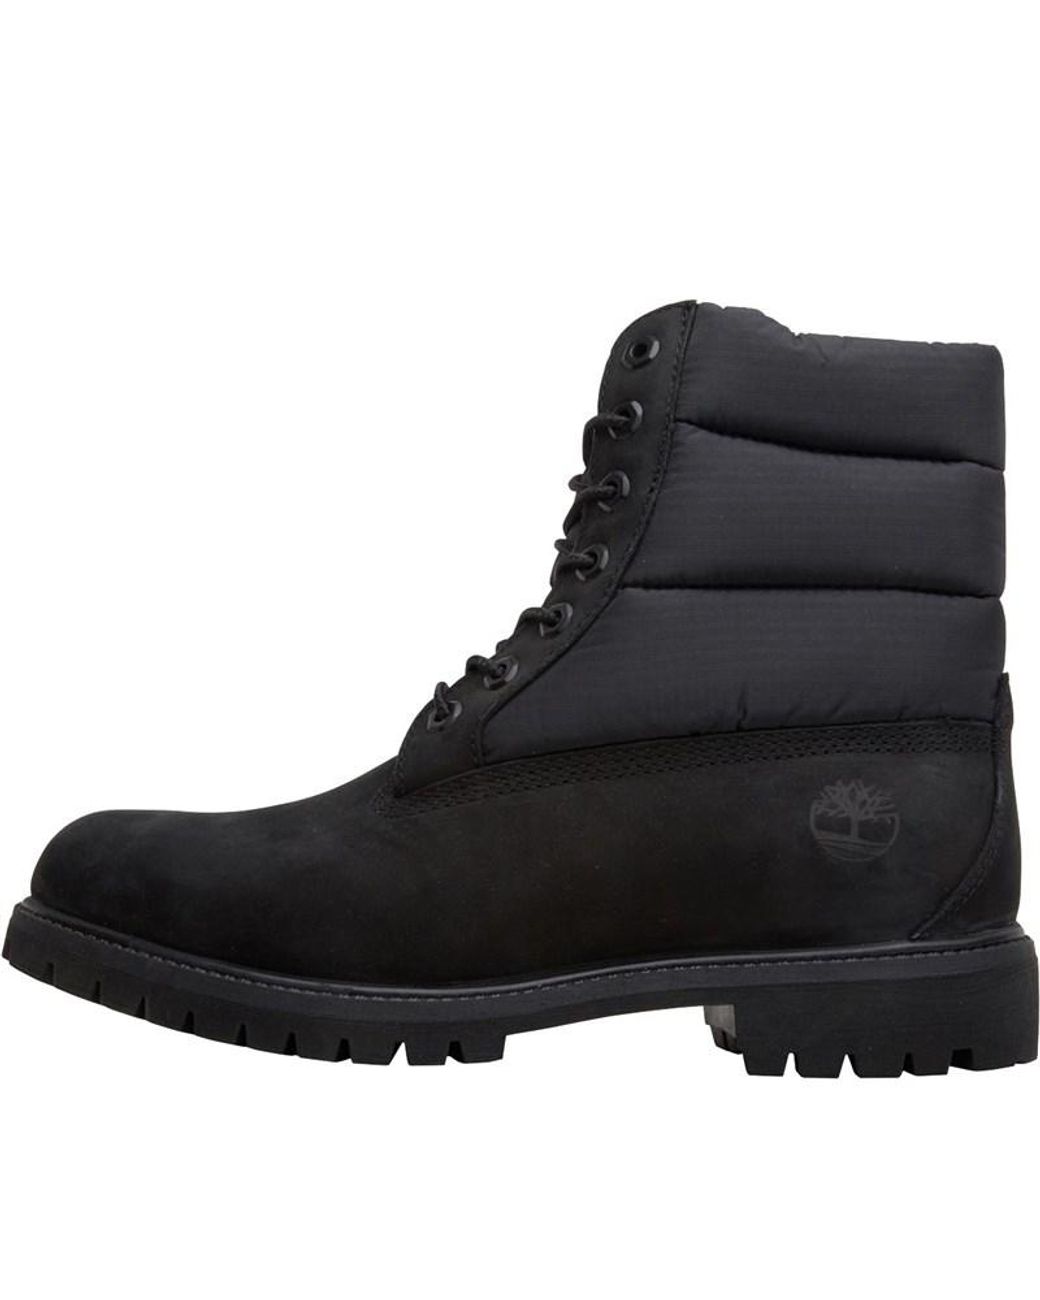 Timberland Leather 6 Inch Premium Puffer Boots Black for Men - Lyst